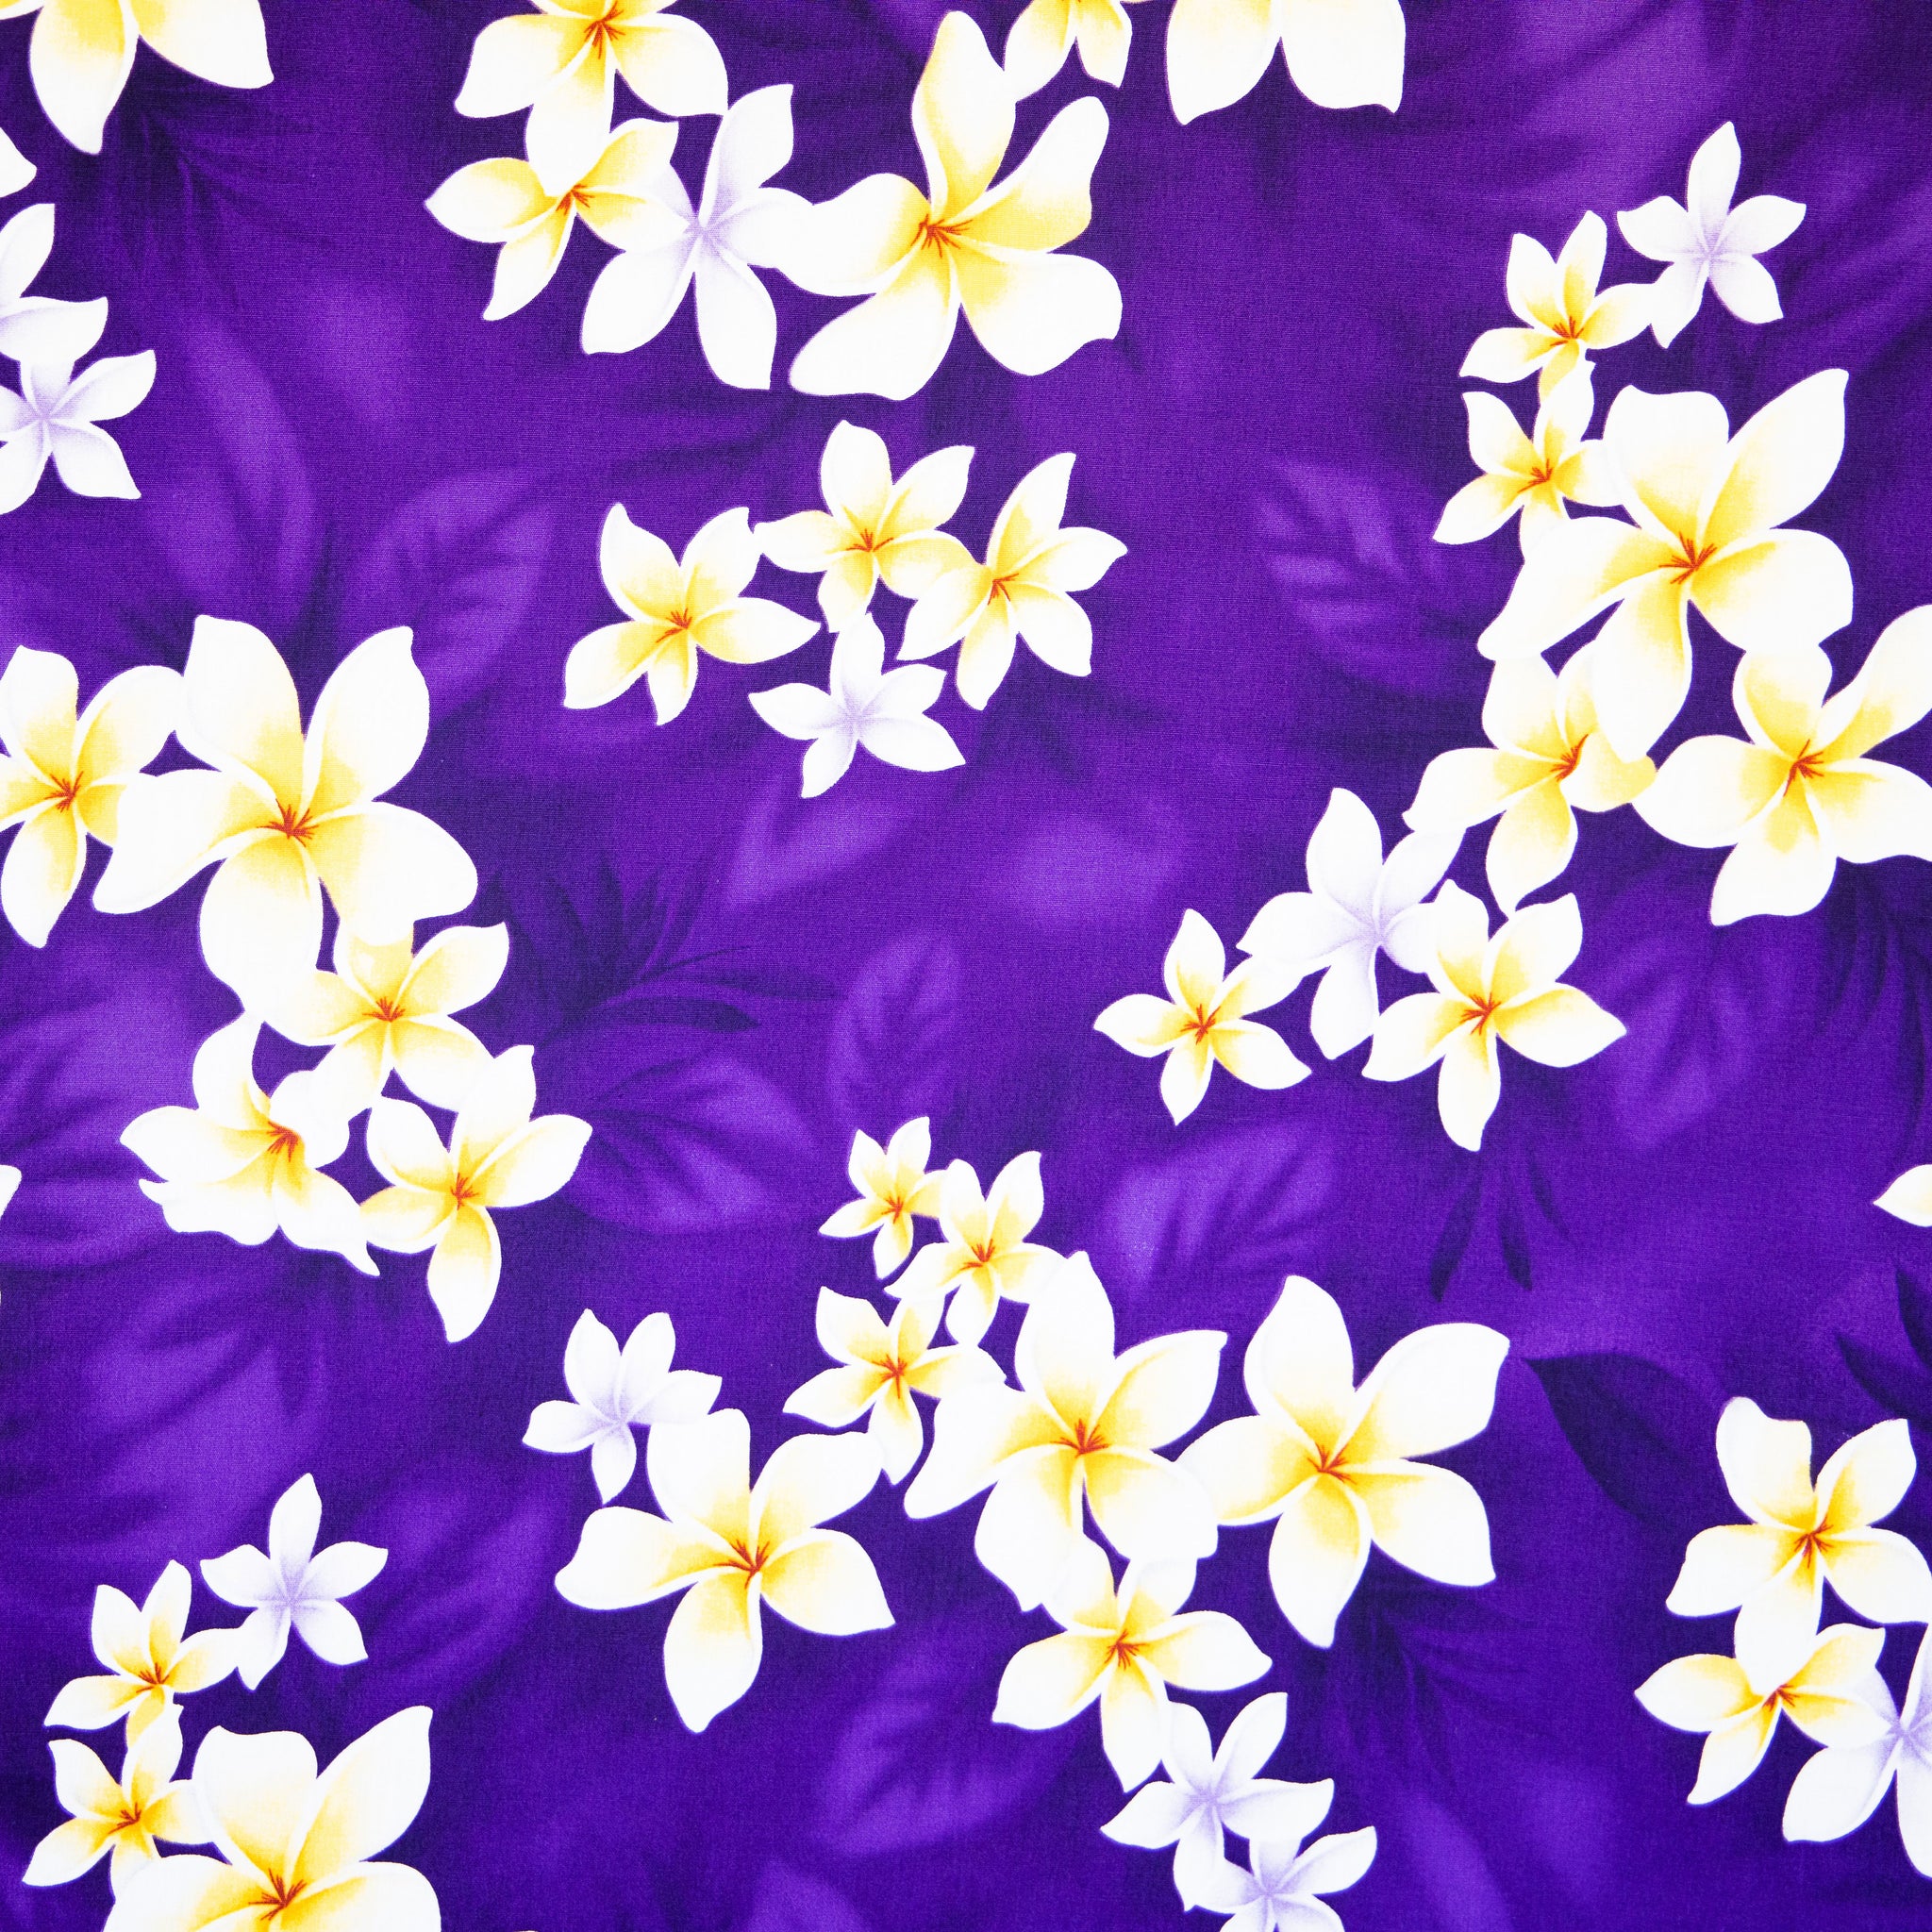 Quilted Fabric - 100% Cotton - 52 inch Wide - Sold by Yard - Turtle -  Hibiscus - Floral - Leaves - Hawaiian - Ferns (Ulu Fruit Purple)